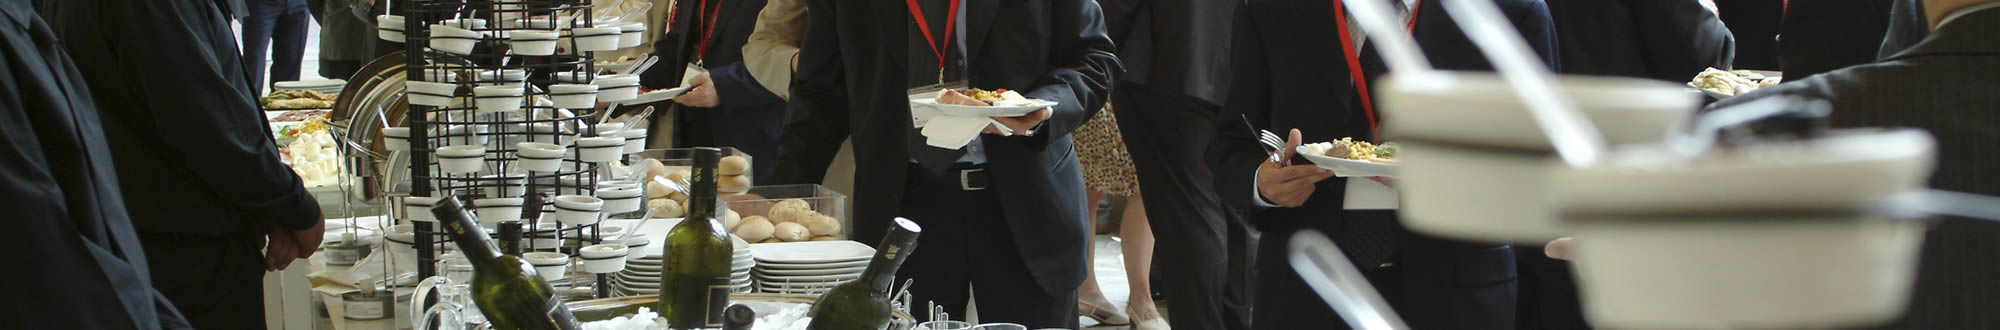 Glasgow Conference Catering